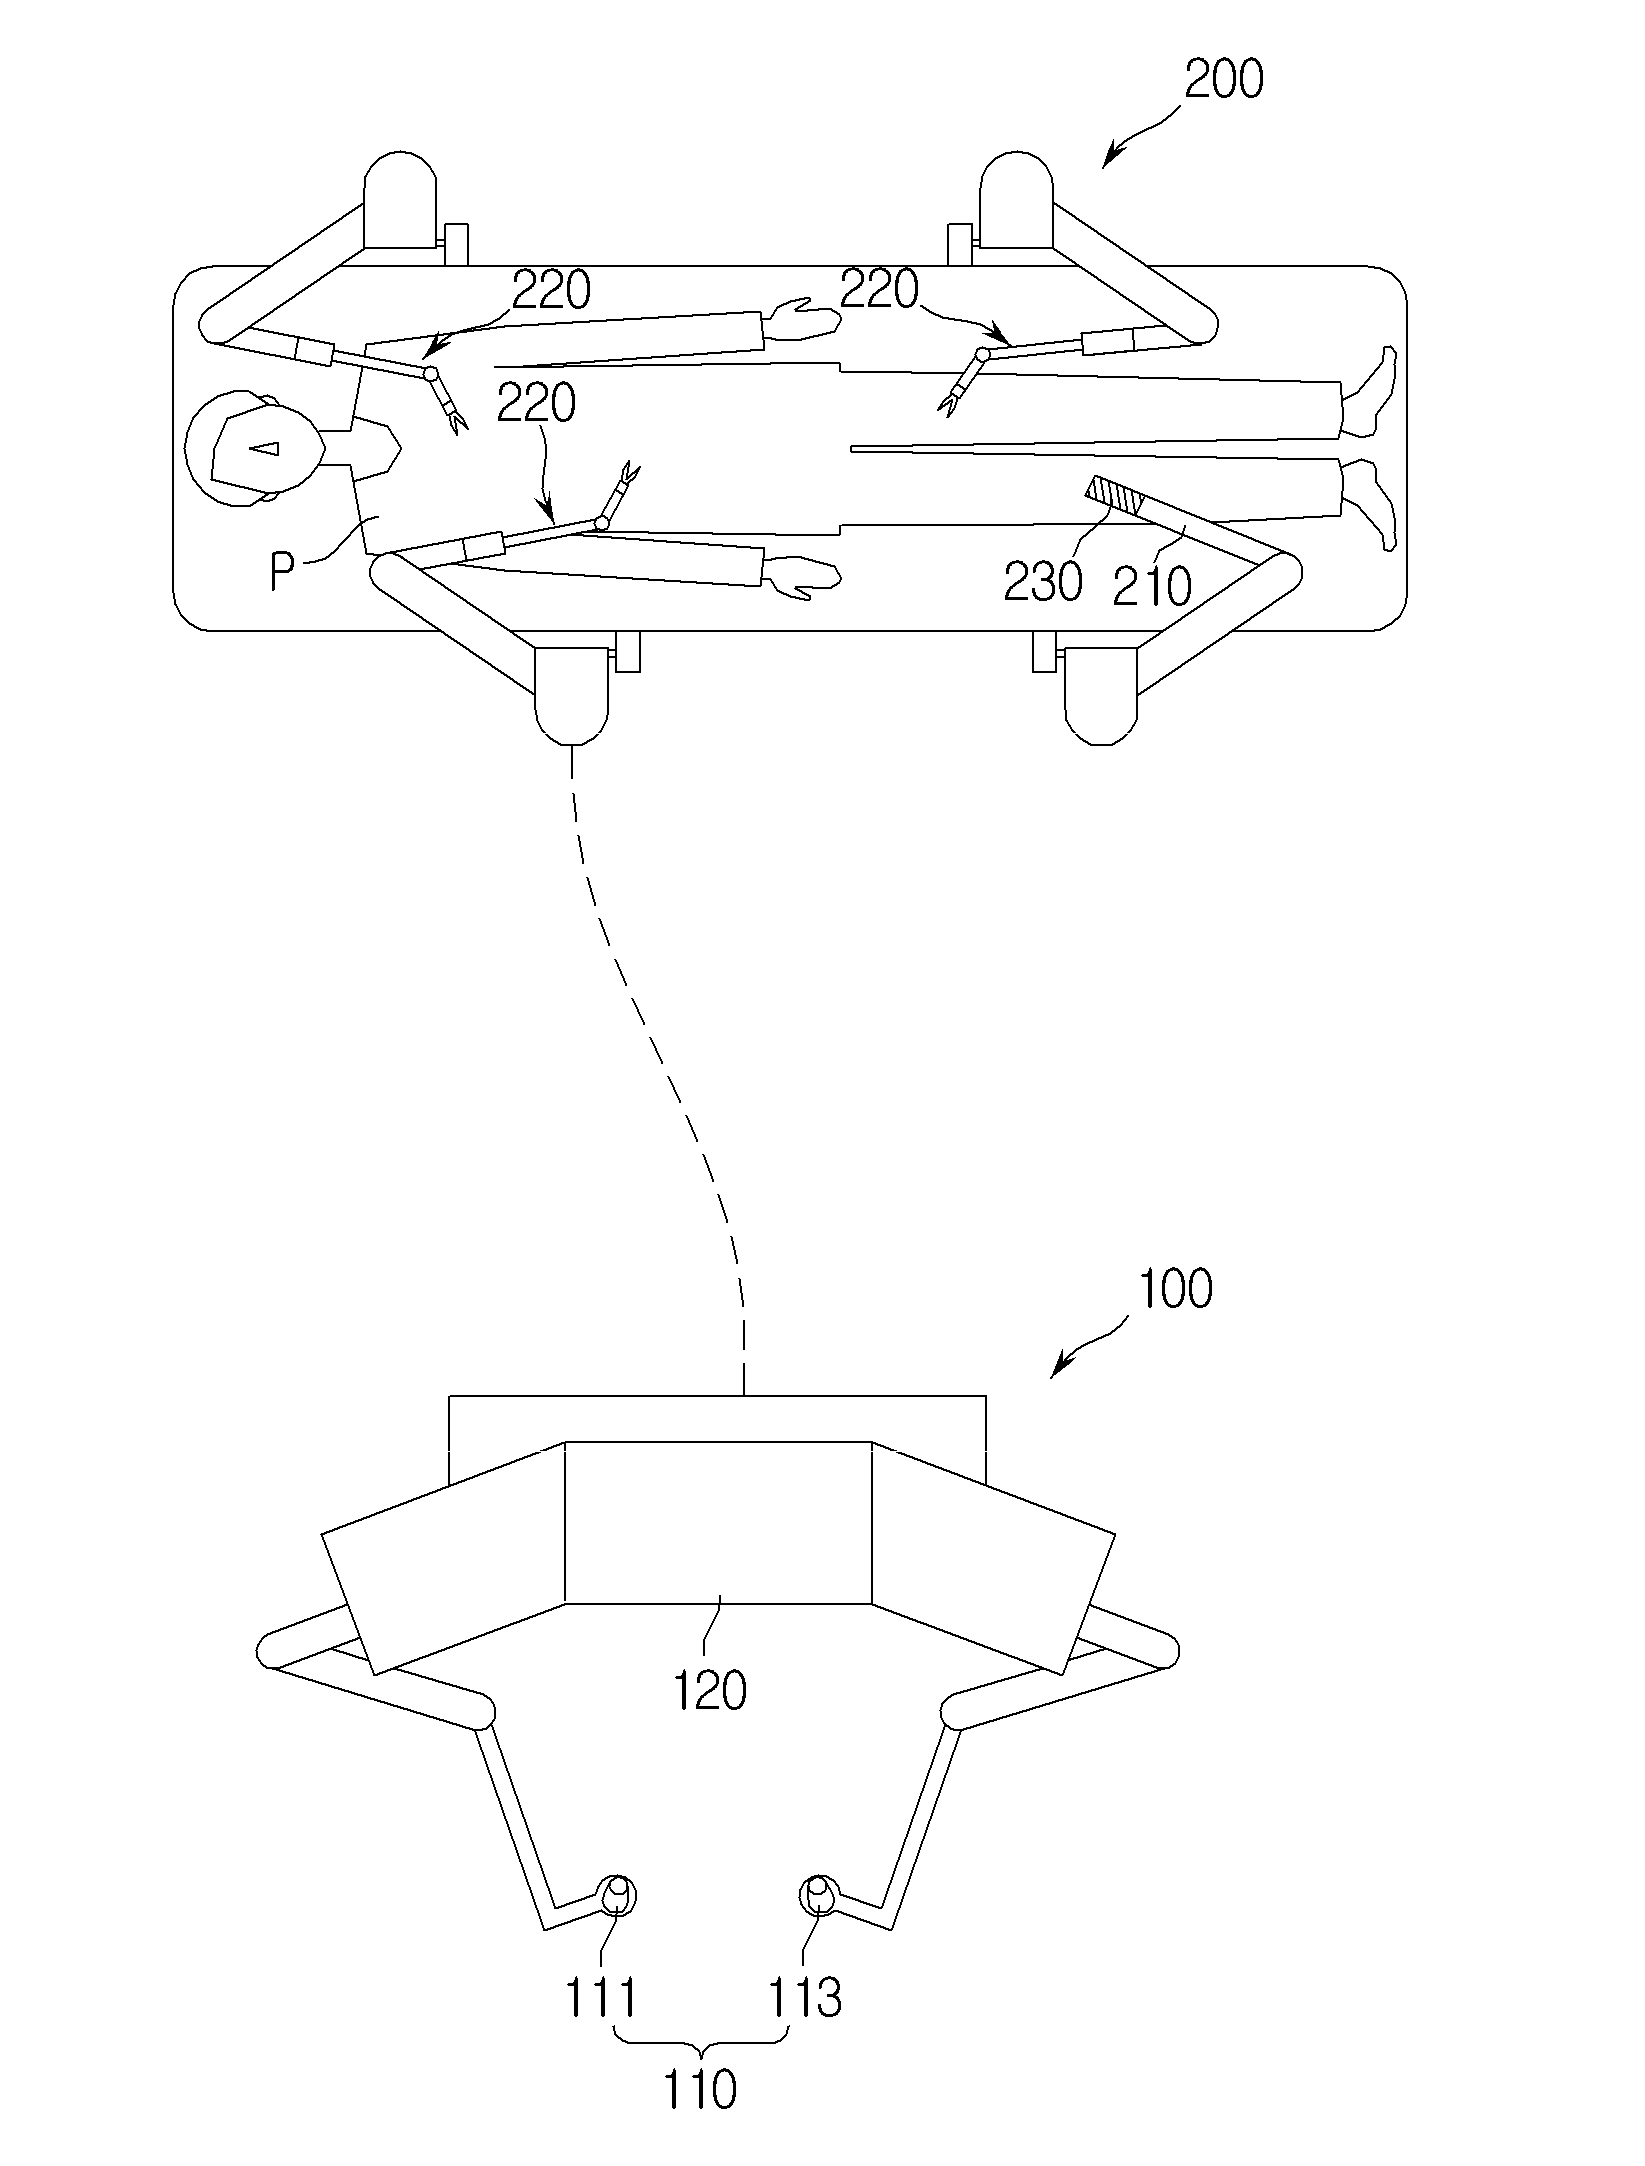 Control methods of single-port surgical robot